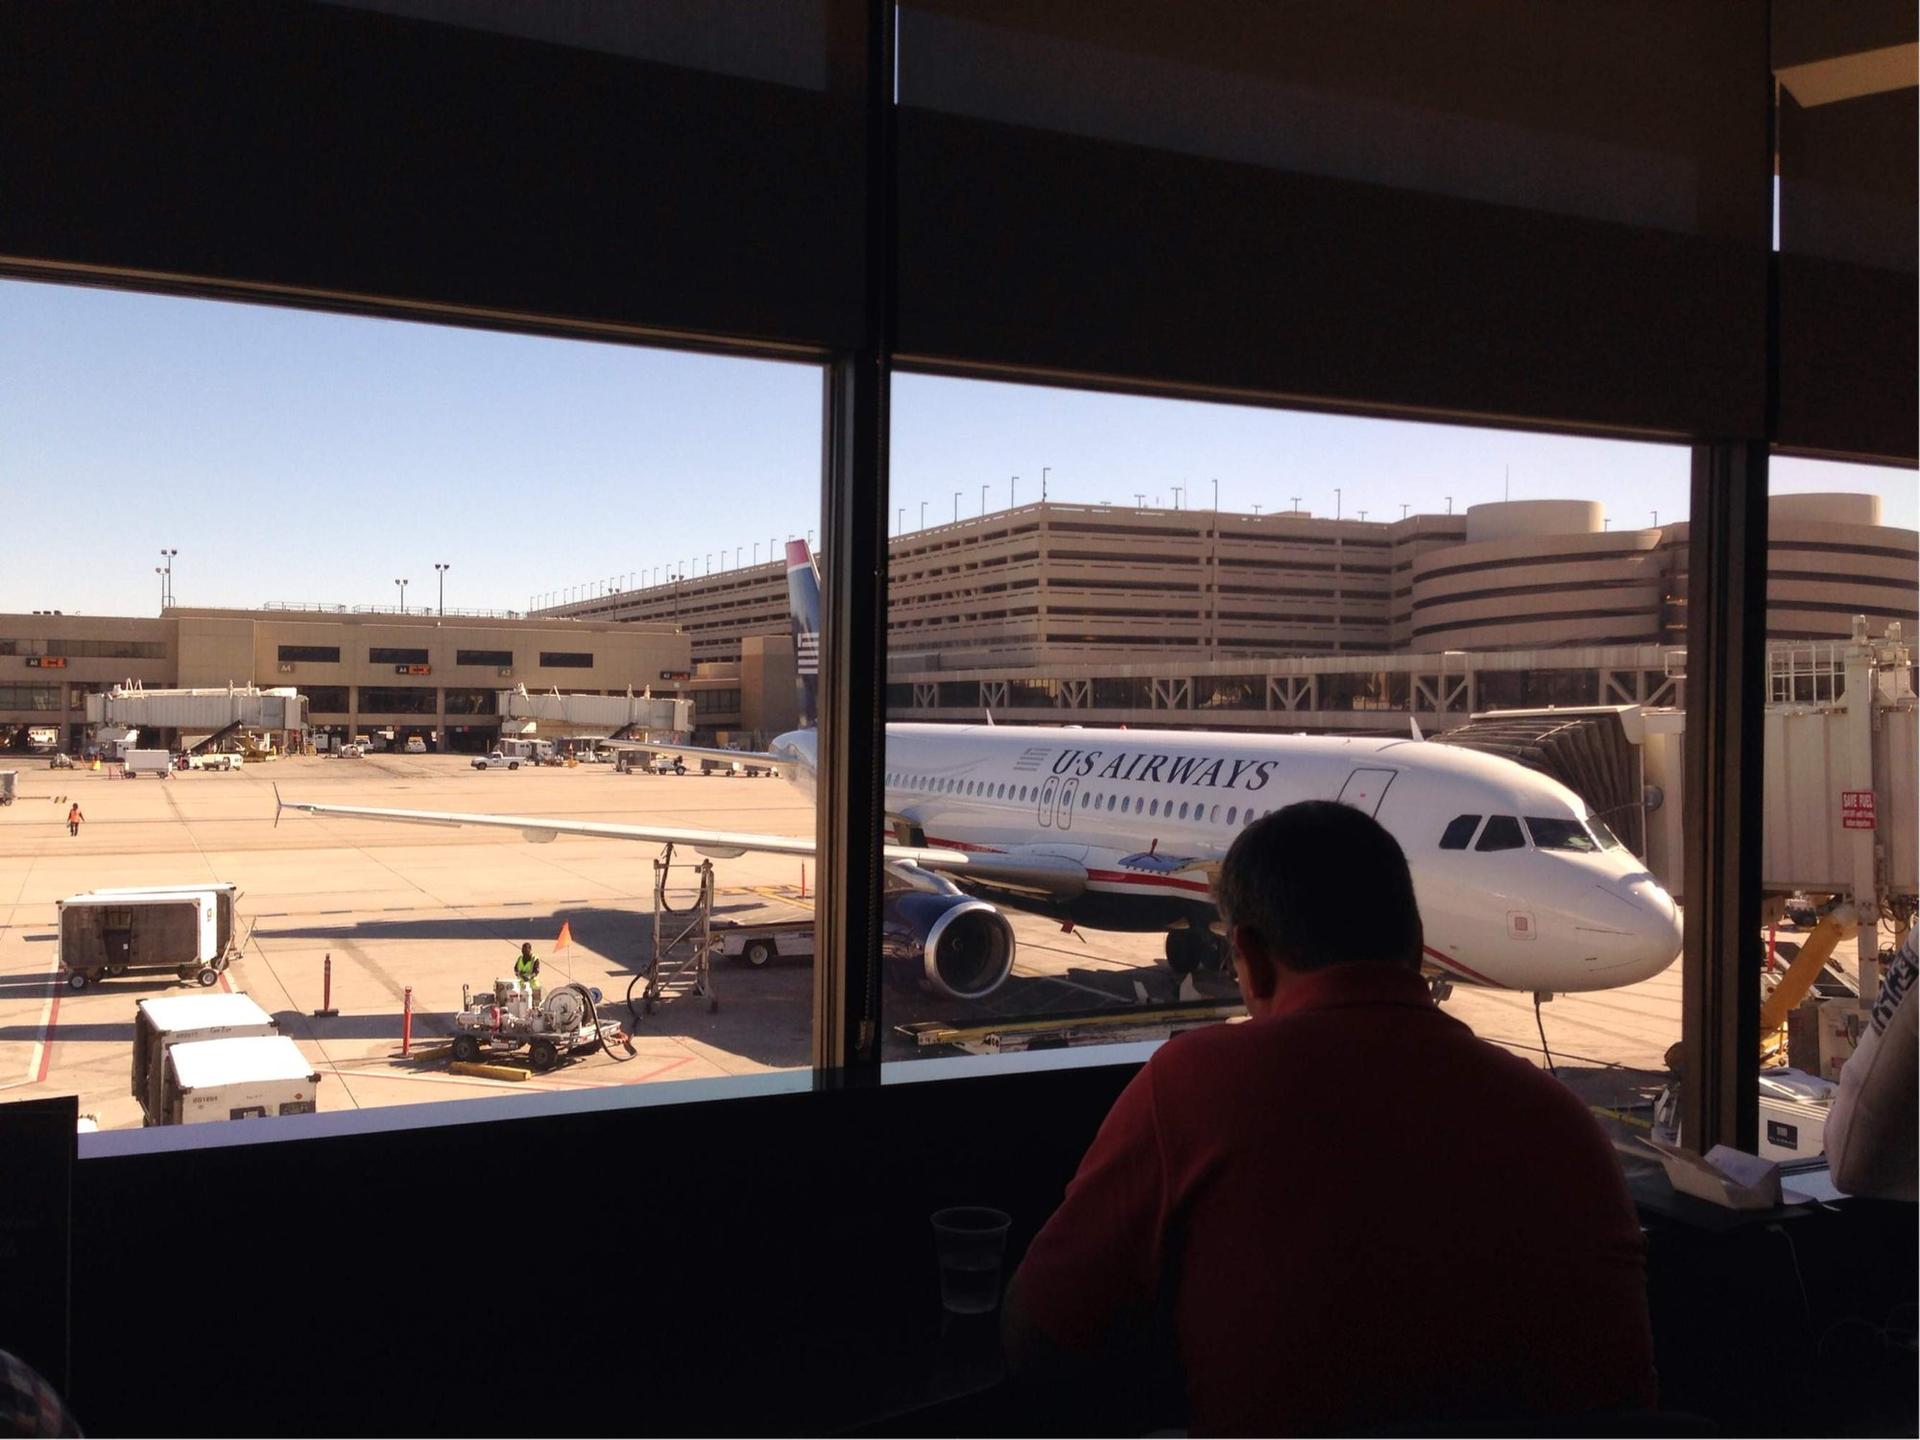 American Airlines Admirals Club (Gates A19-A21) image 10 of 16